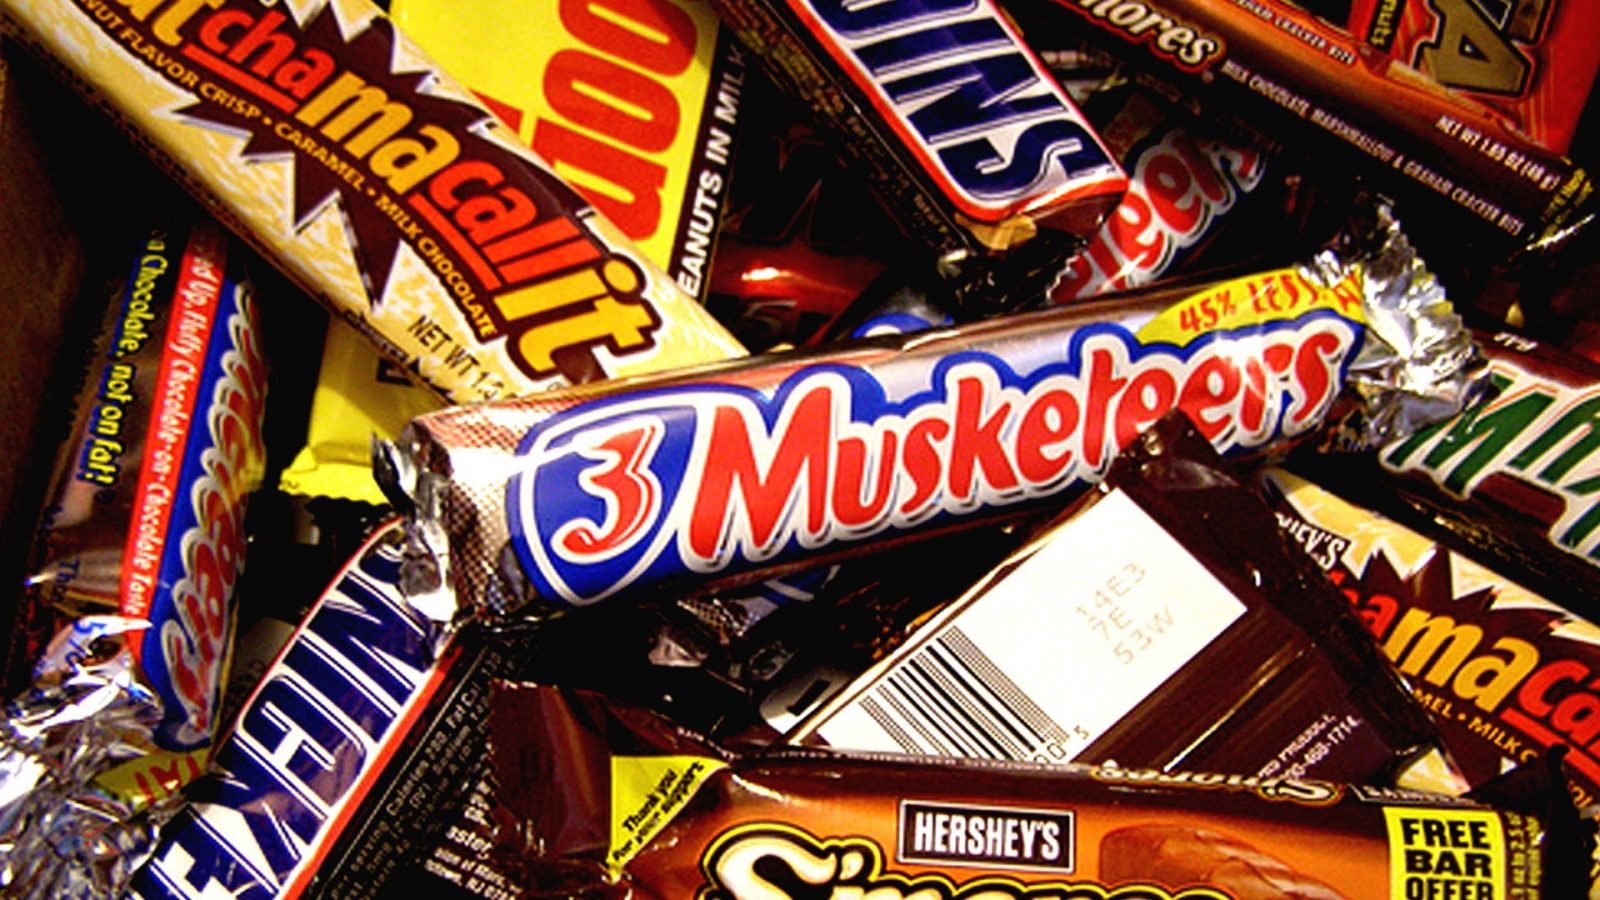 Can We Guess Your Eye & Hair Color With This Food Test? chocolate bars1